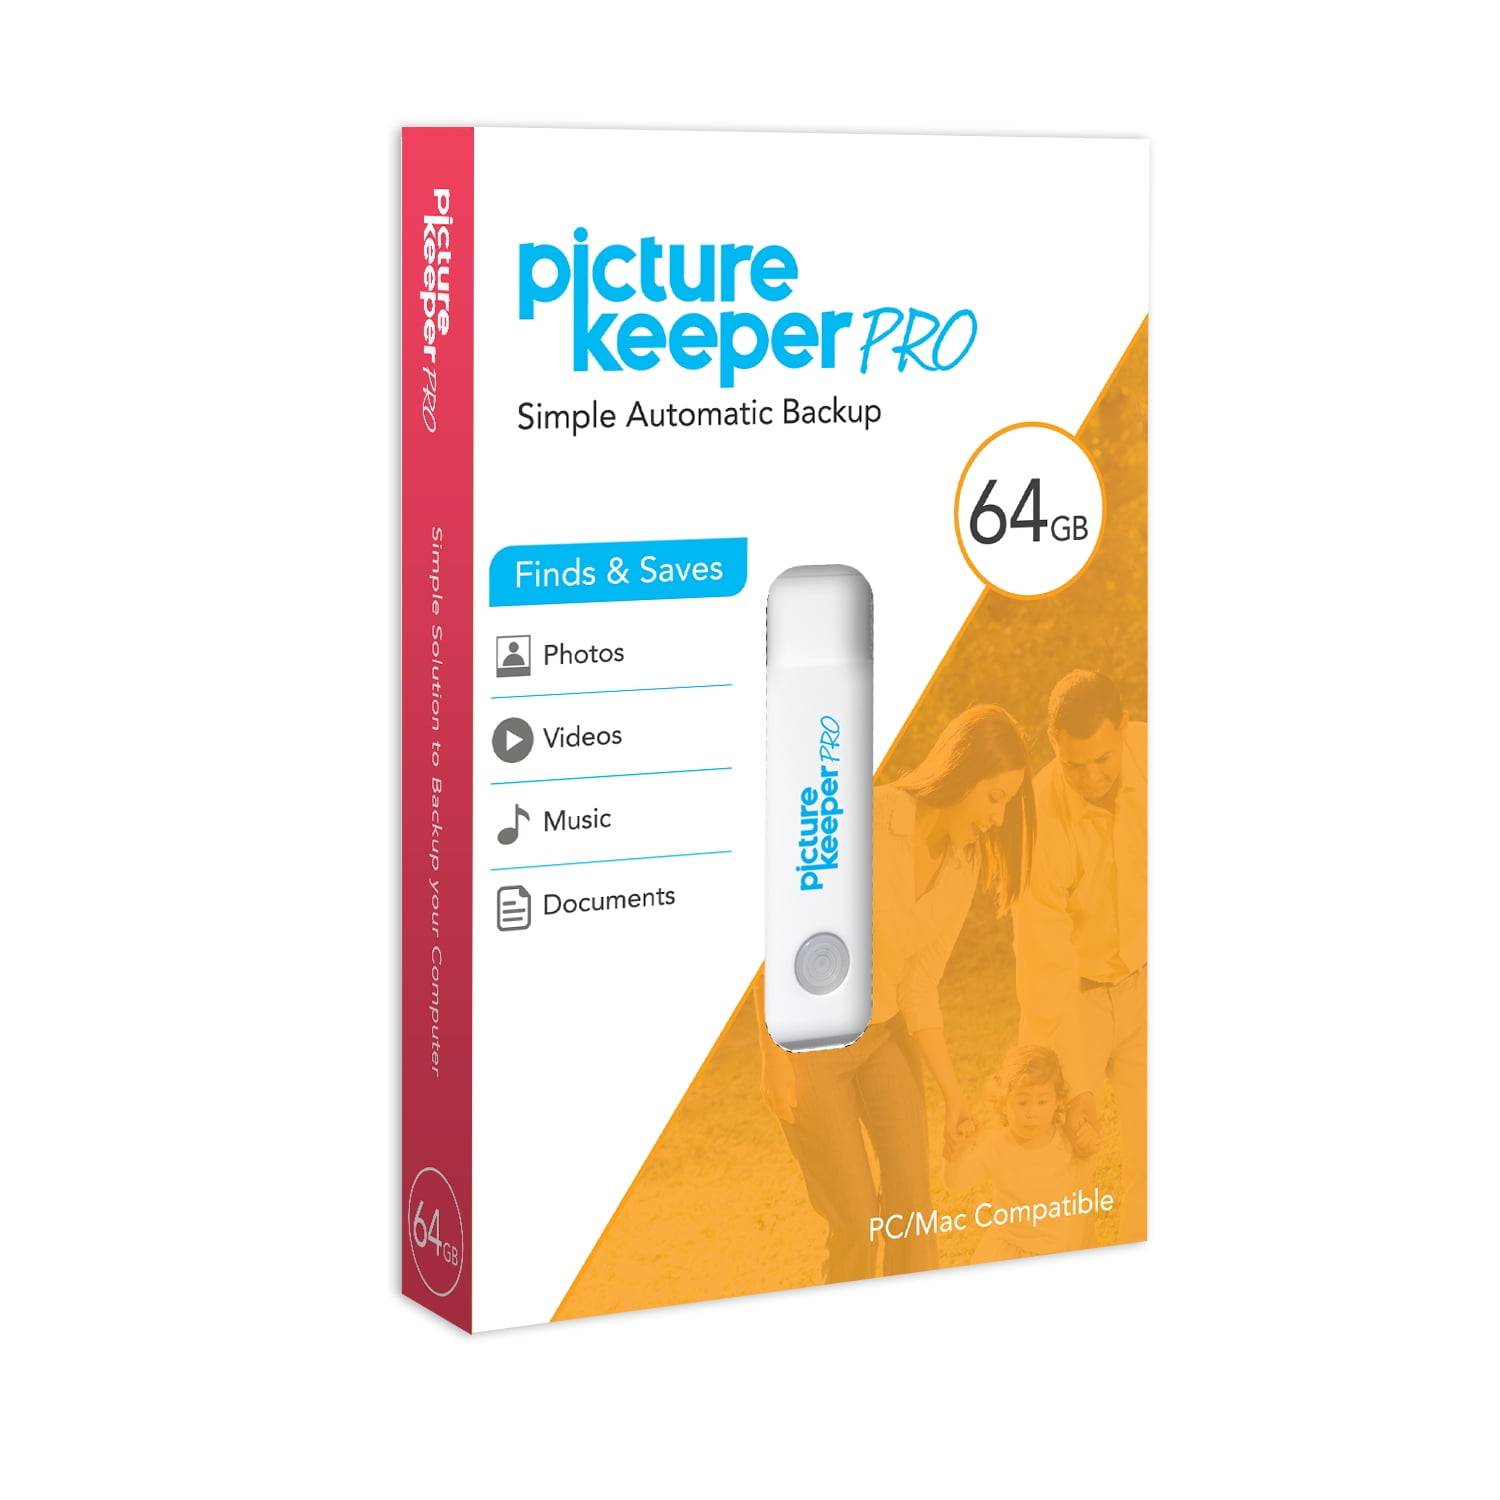 Picture Keeper PRO